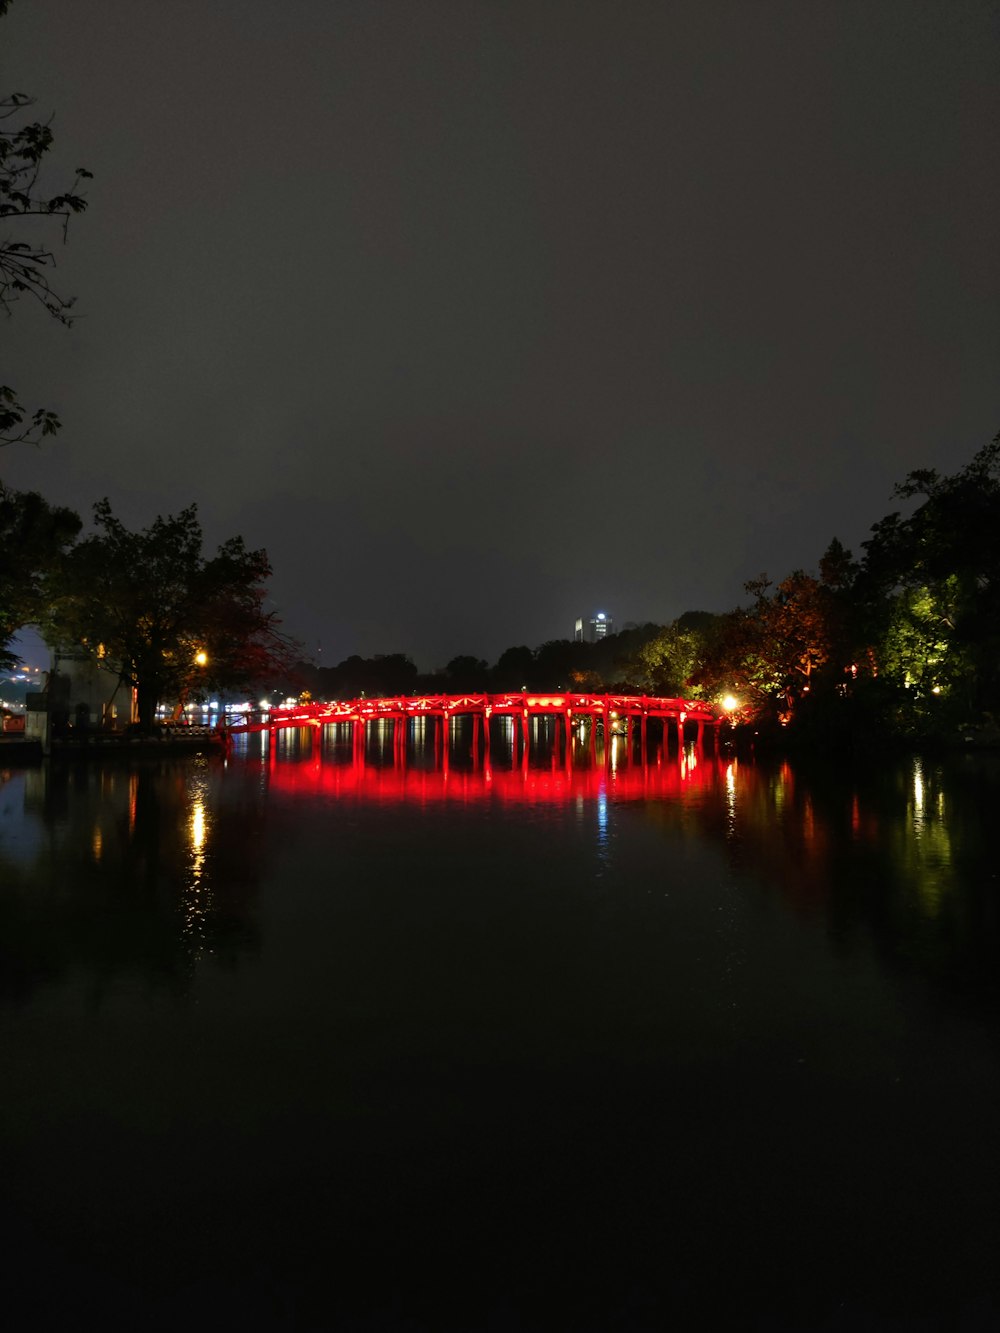 a red bridge lit up at night over a body of water